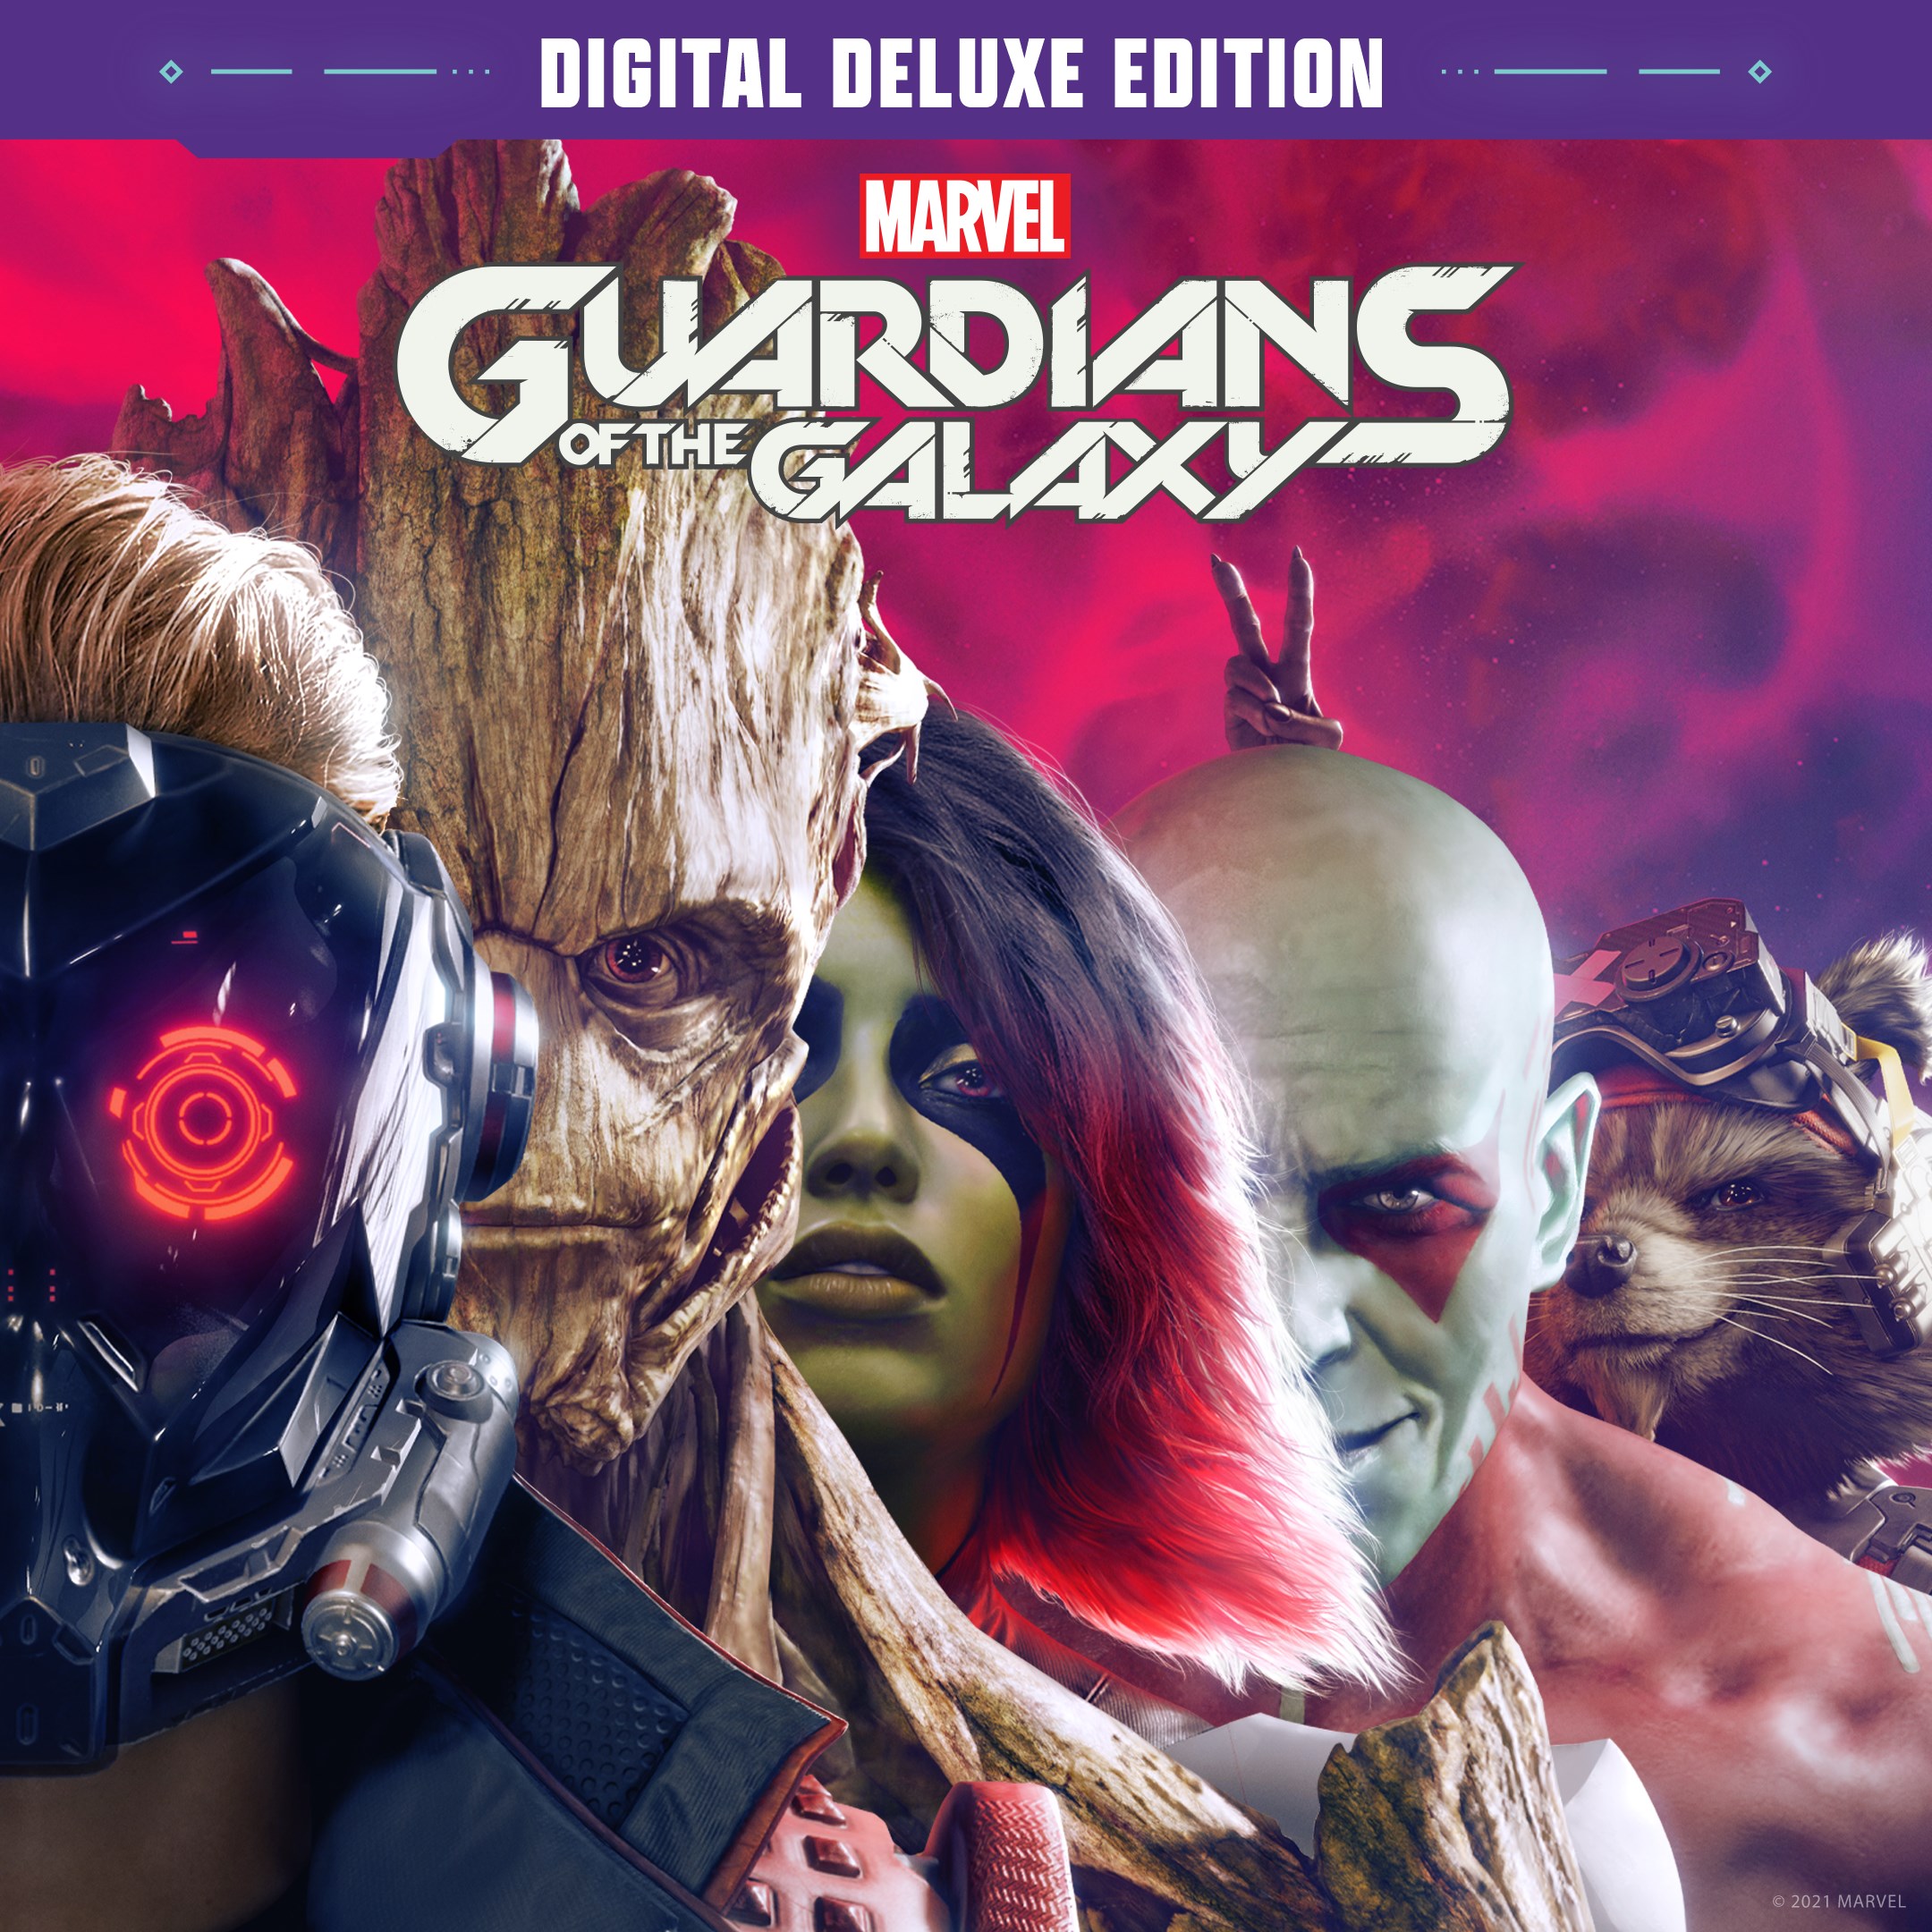 Marvels Guardians of the Galaxy Digital Deluxe Edition